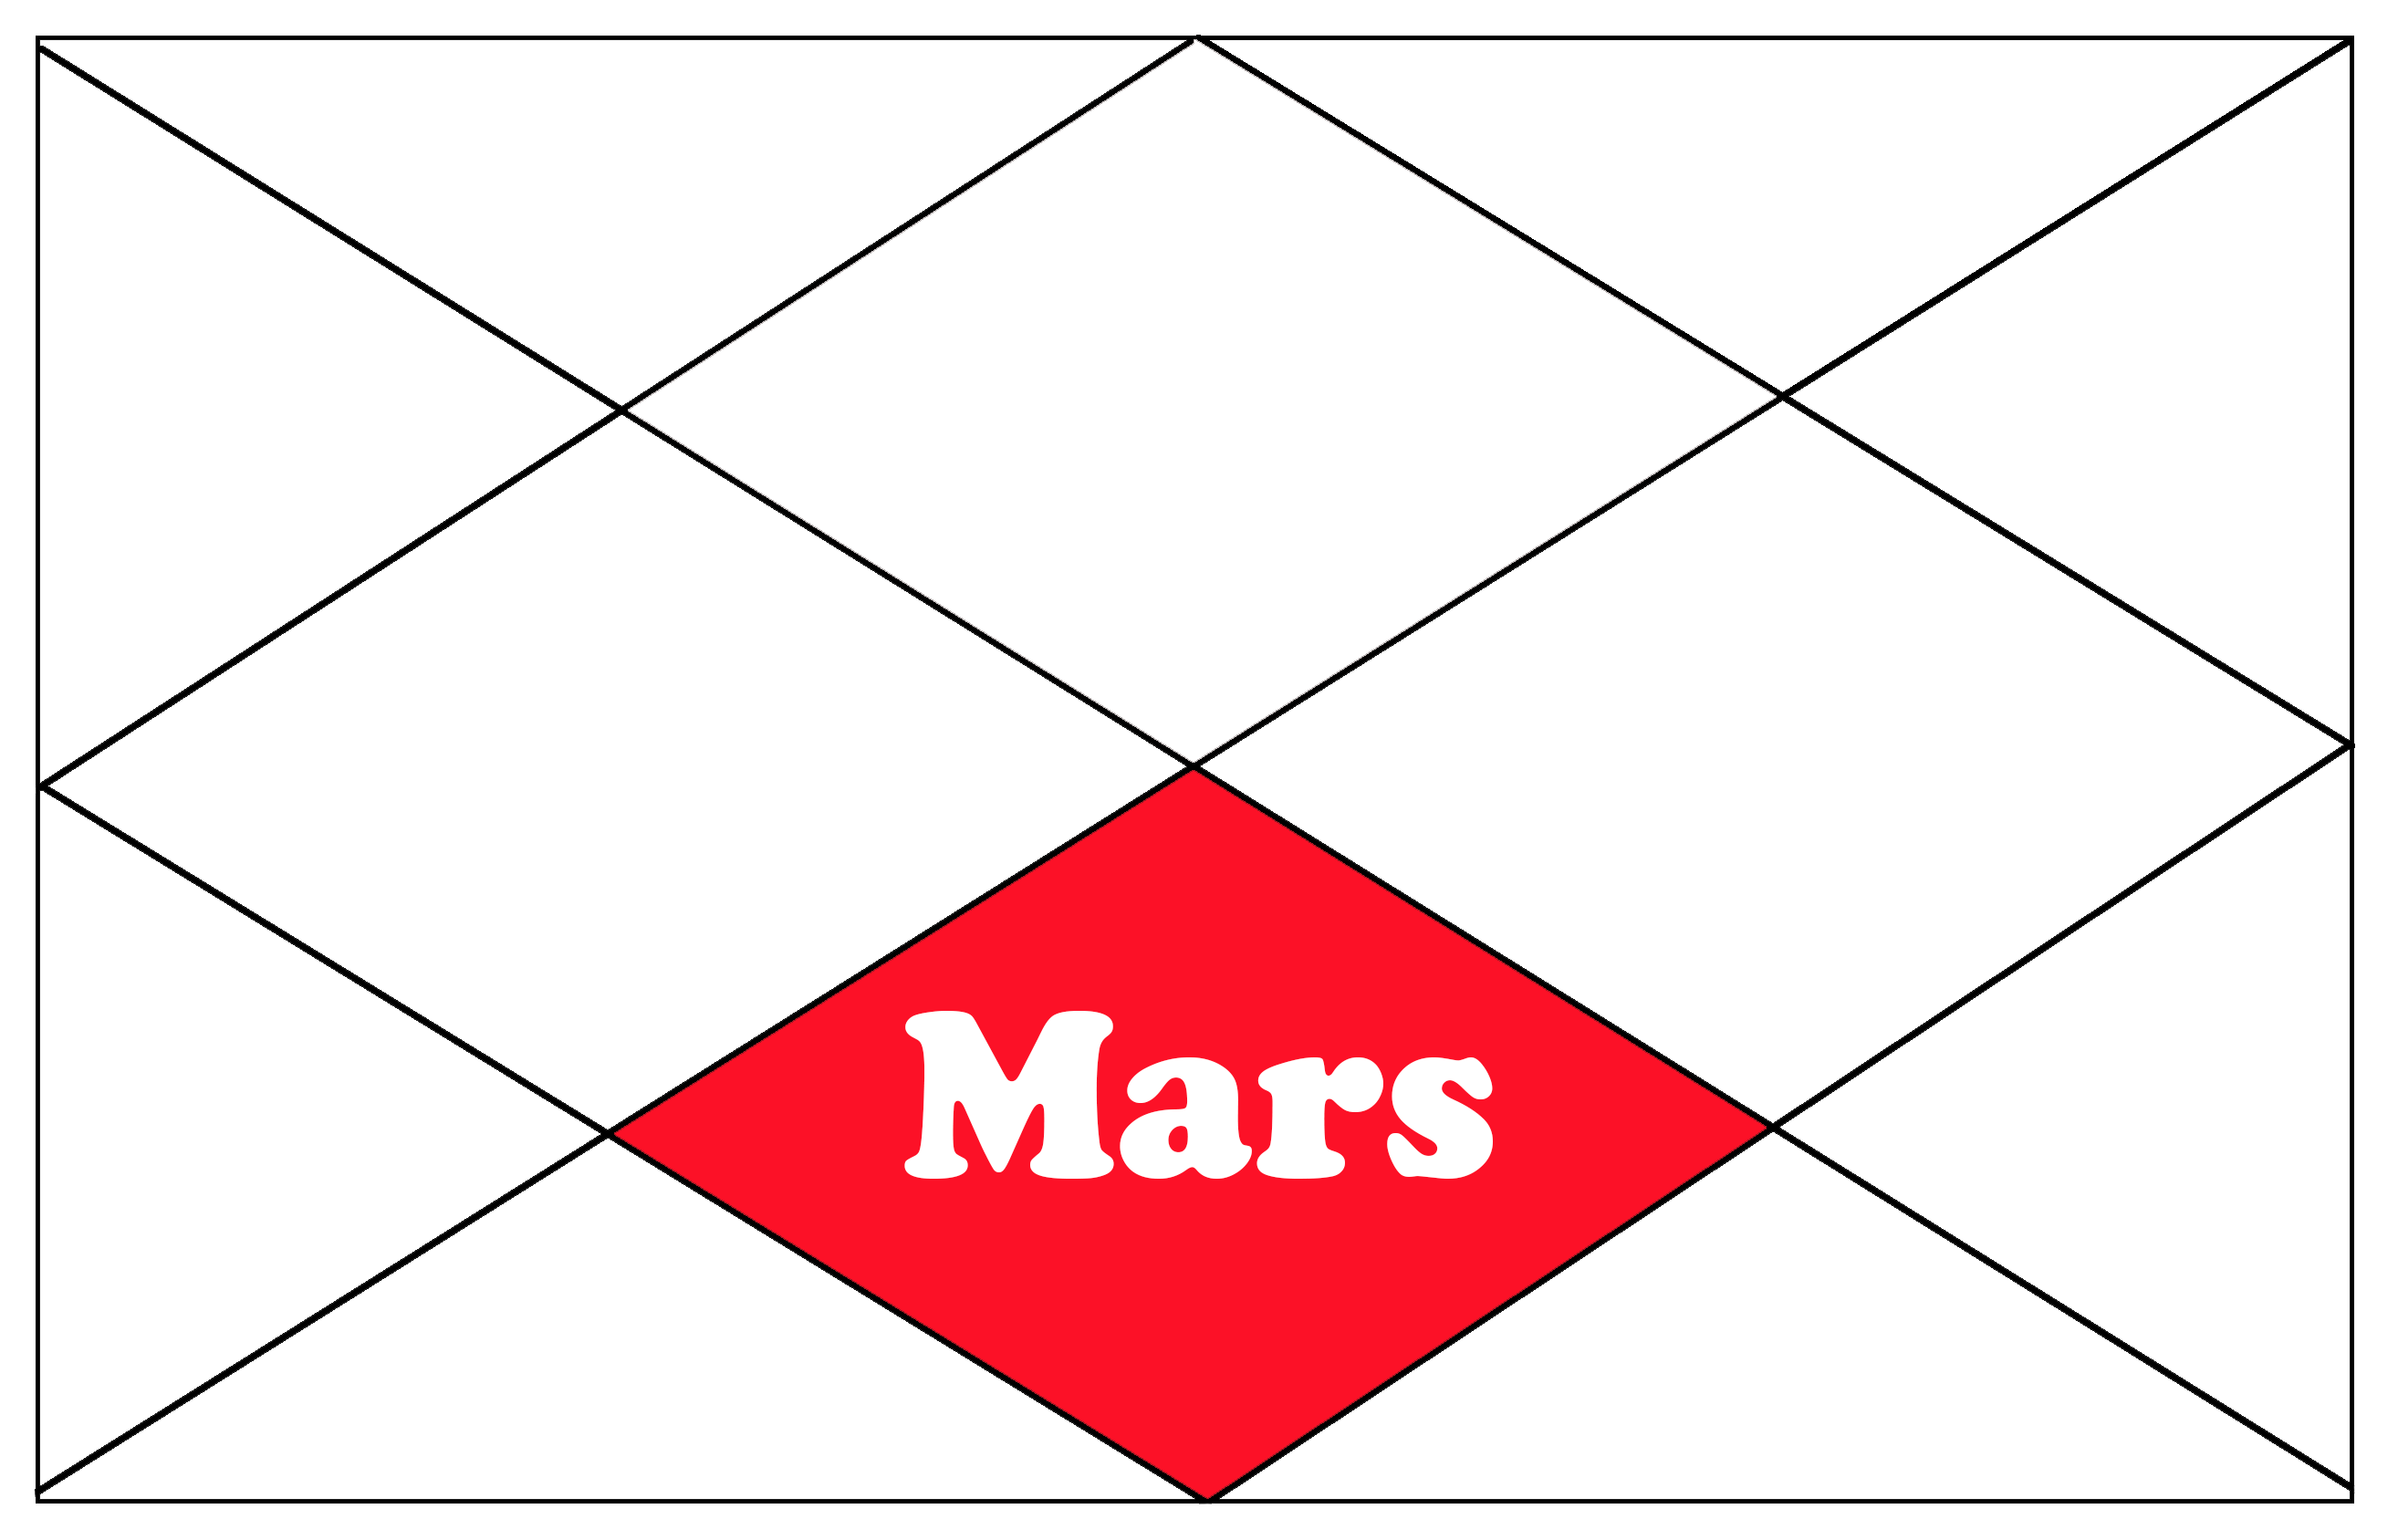 Mars in the 7th house